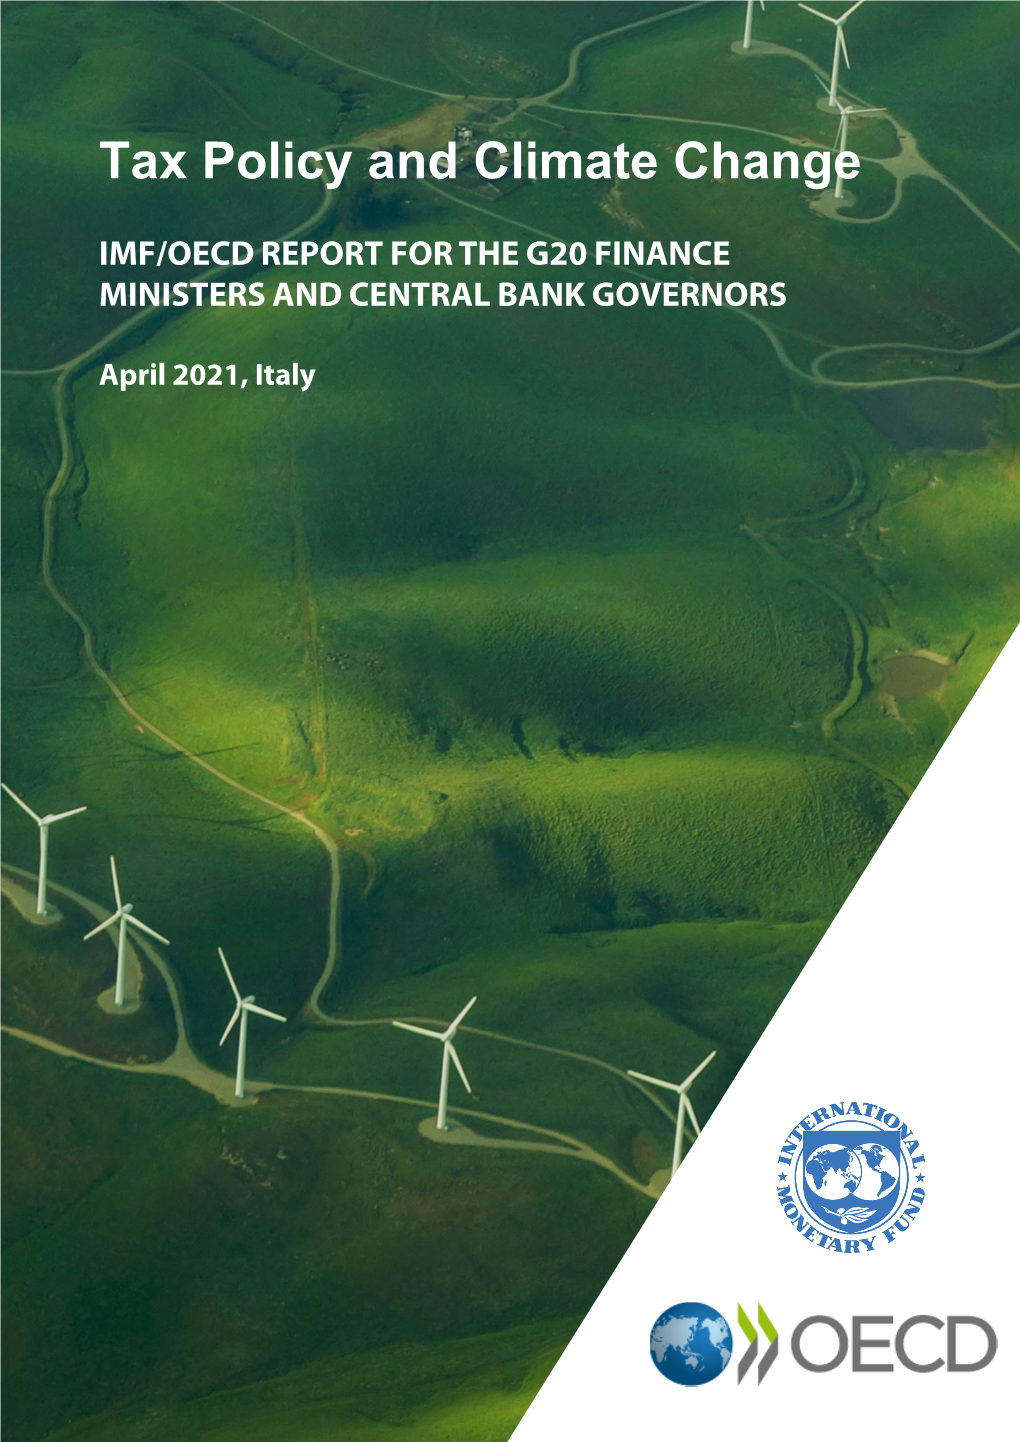 Tax Policy and Climate Change: IMF/OECD Report for the G20 Finance Ministers and Central Bank Governors, April 2021, Italy